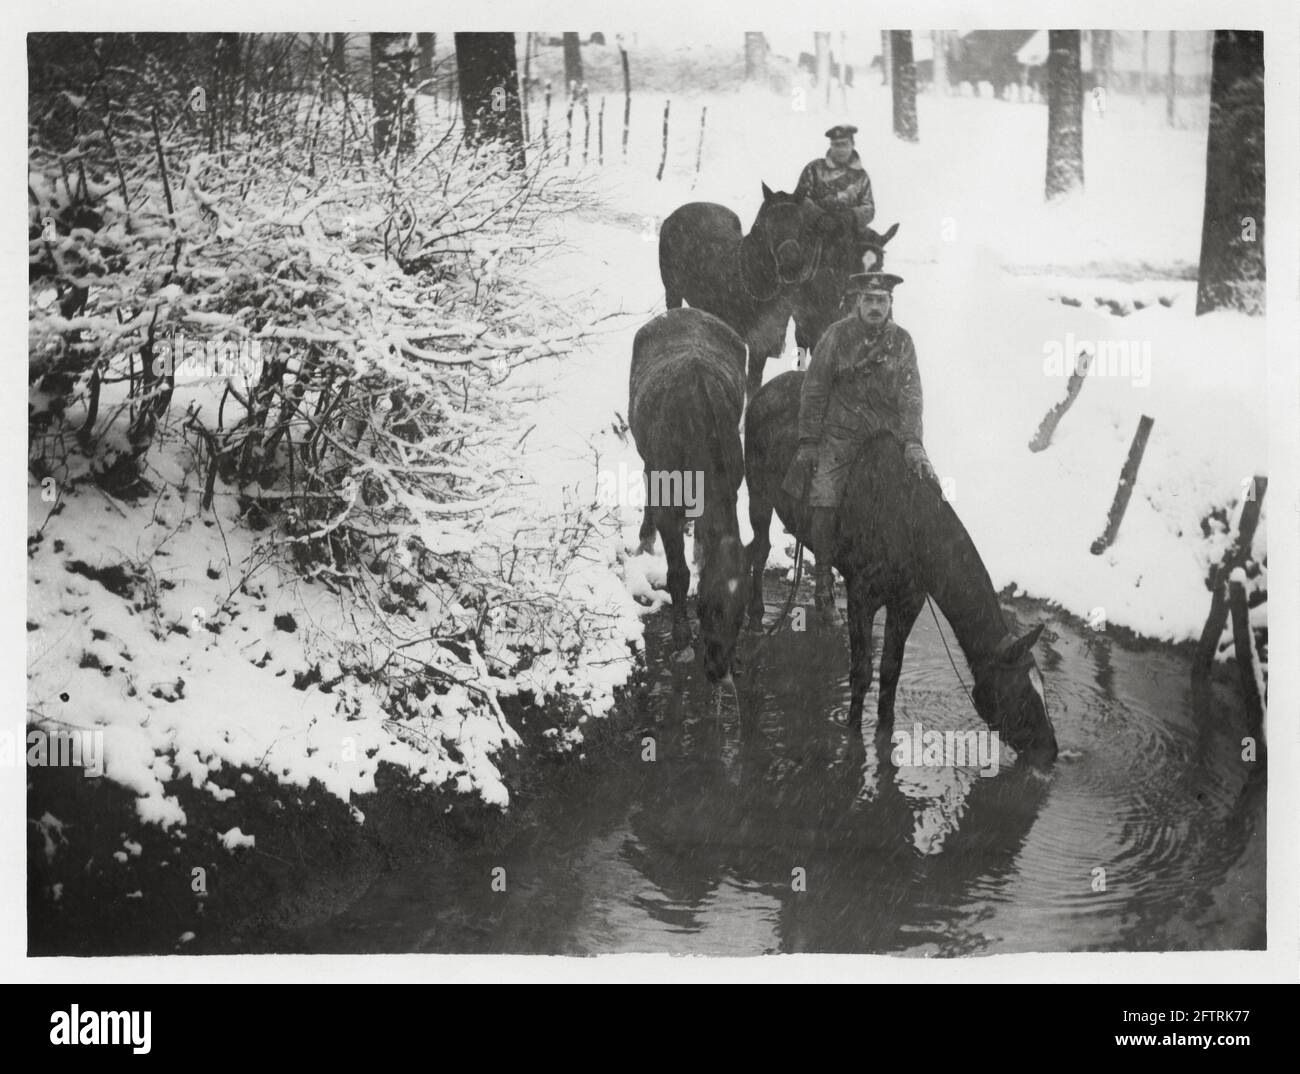 World War One, WWI, Western Front - British soldiers give their horses a drink from a stream in snow, France Stock Photo